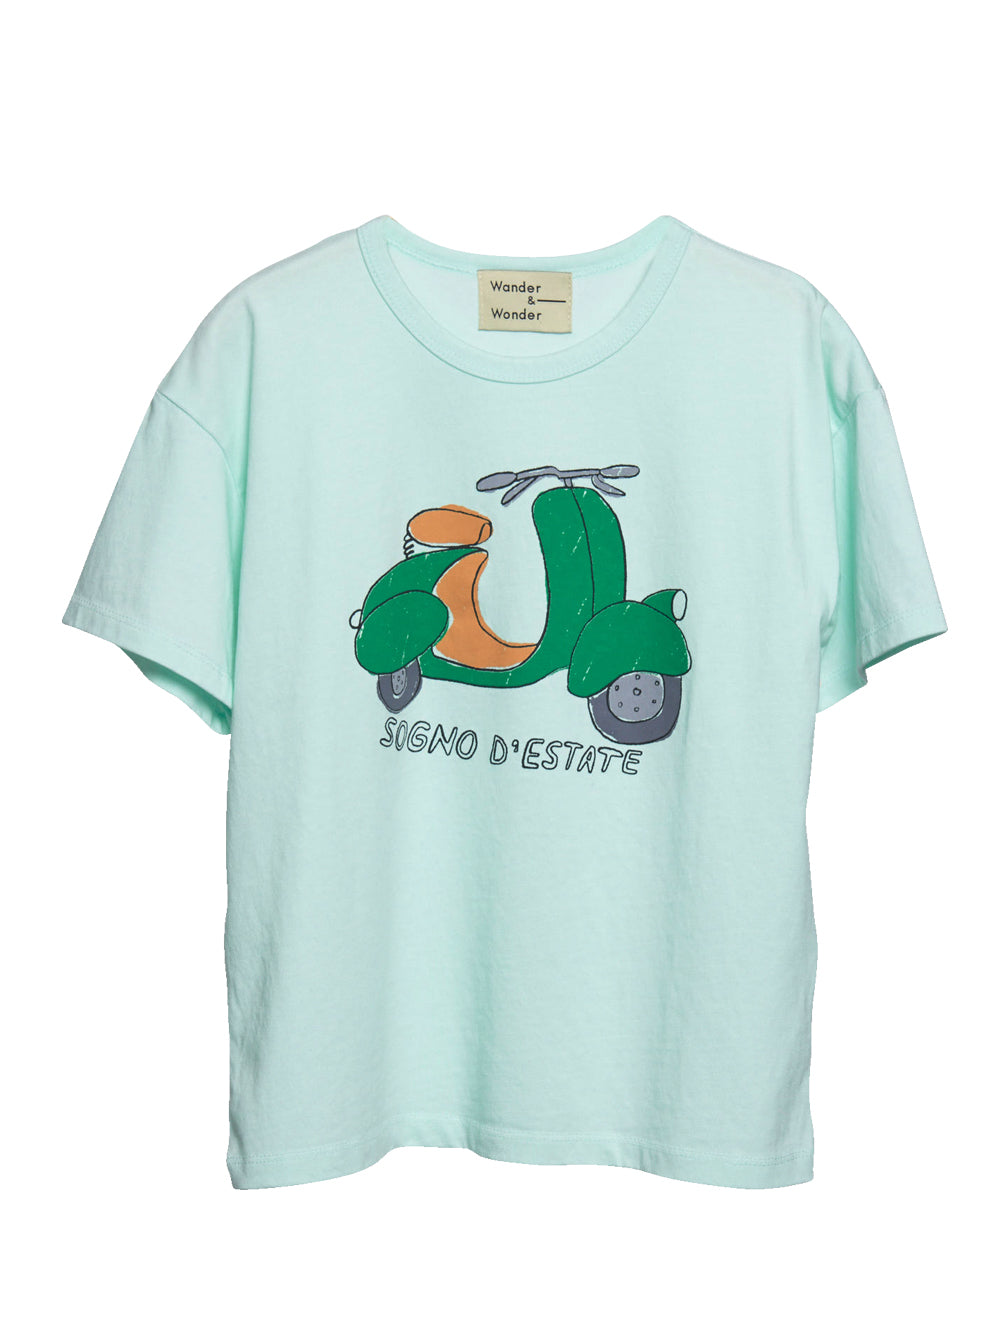 Scooter Tee